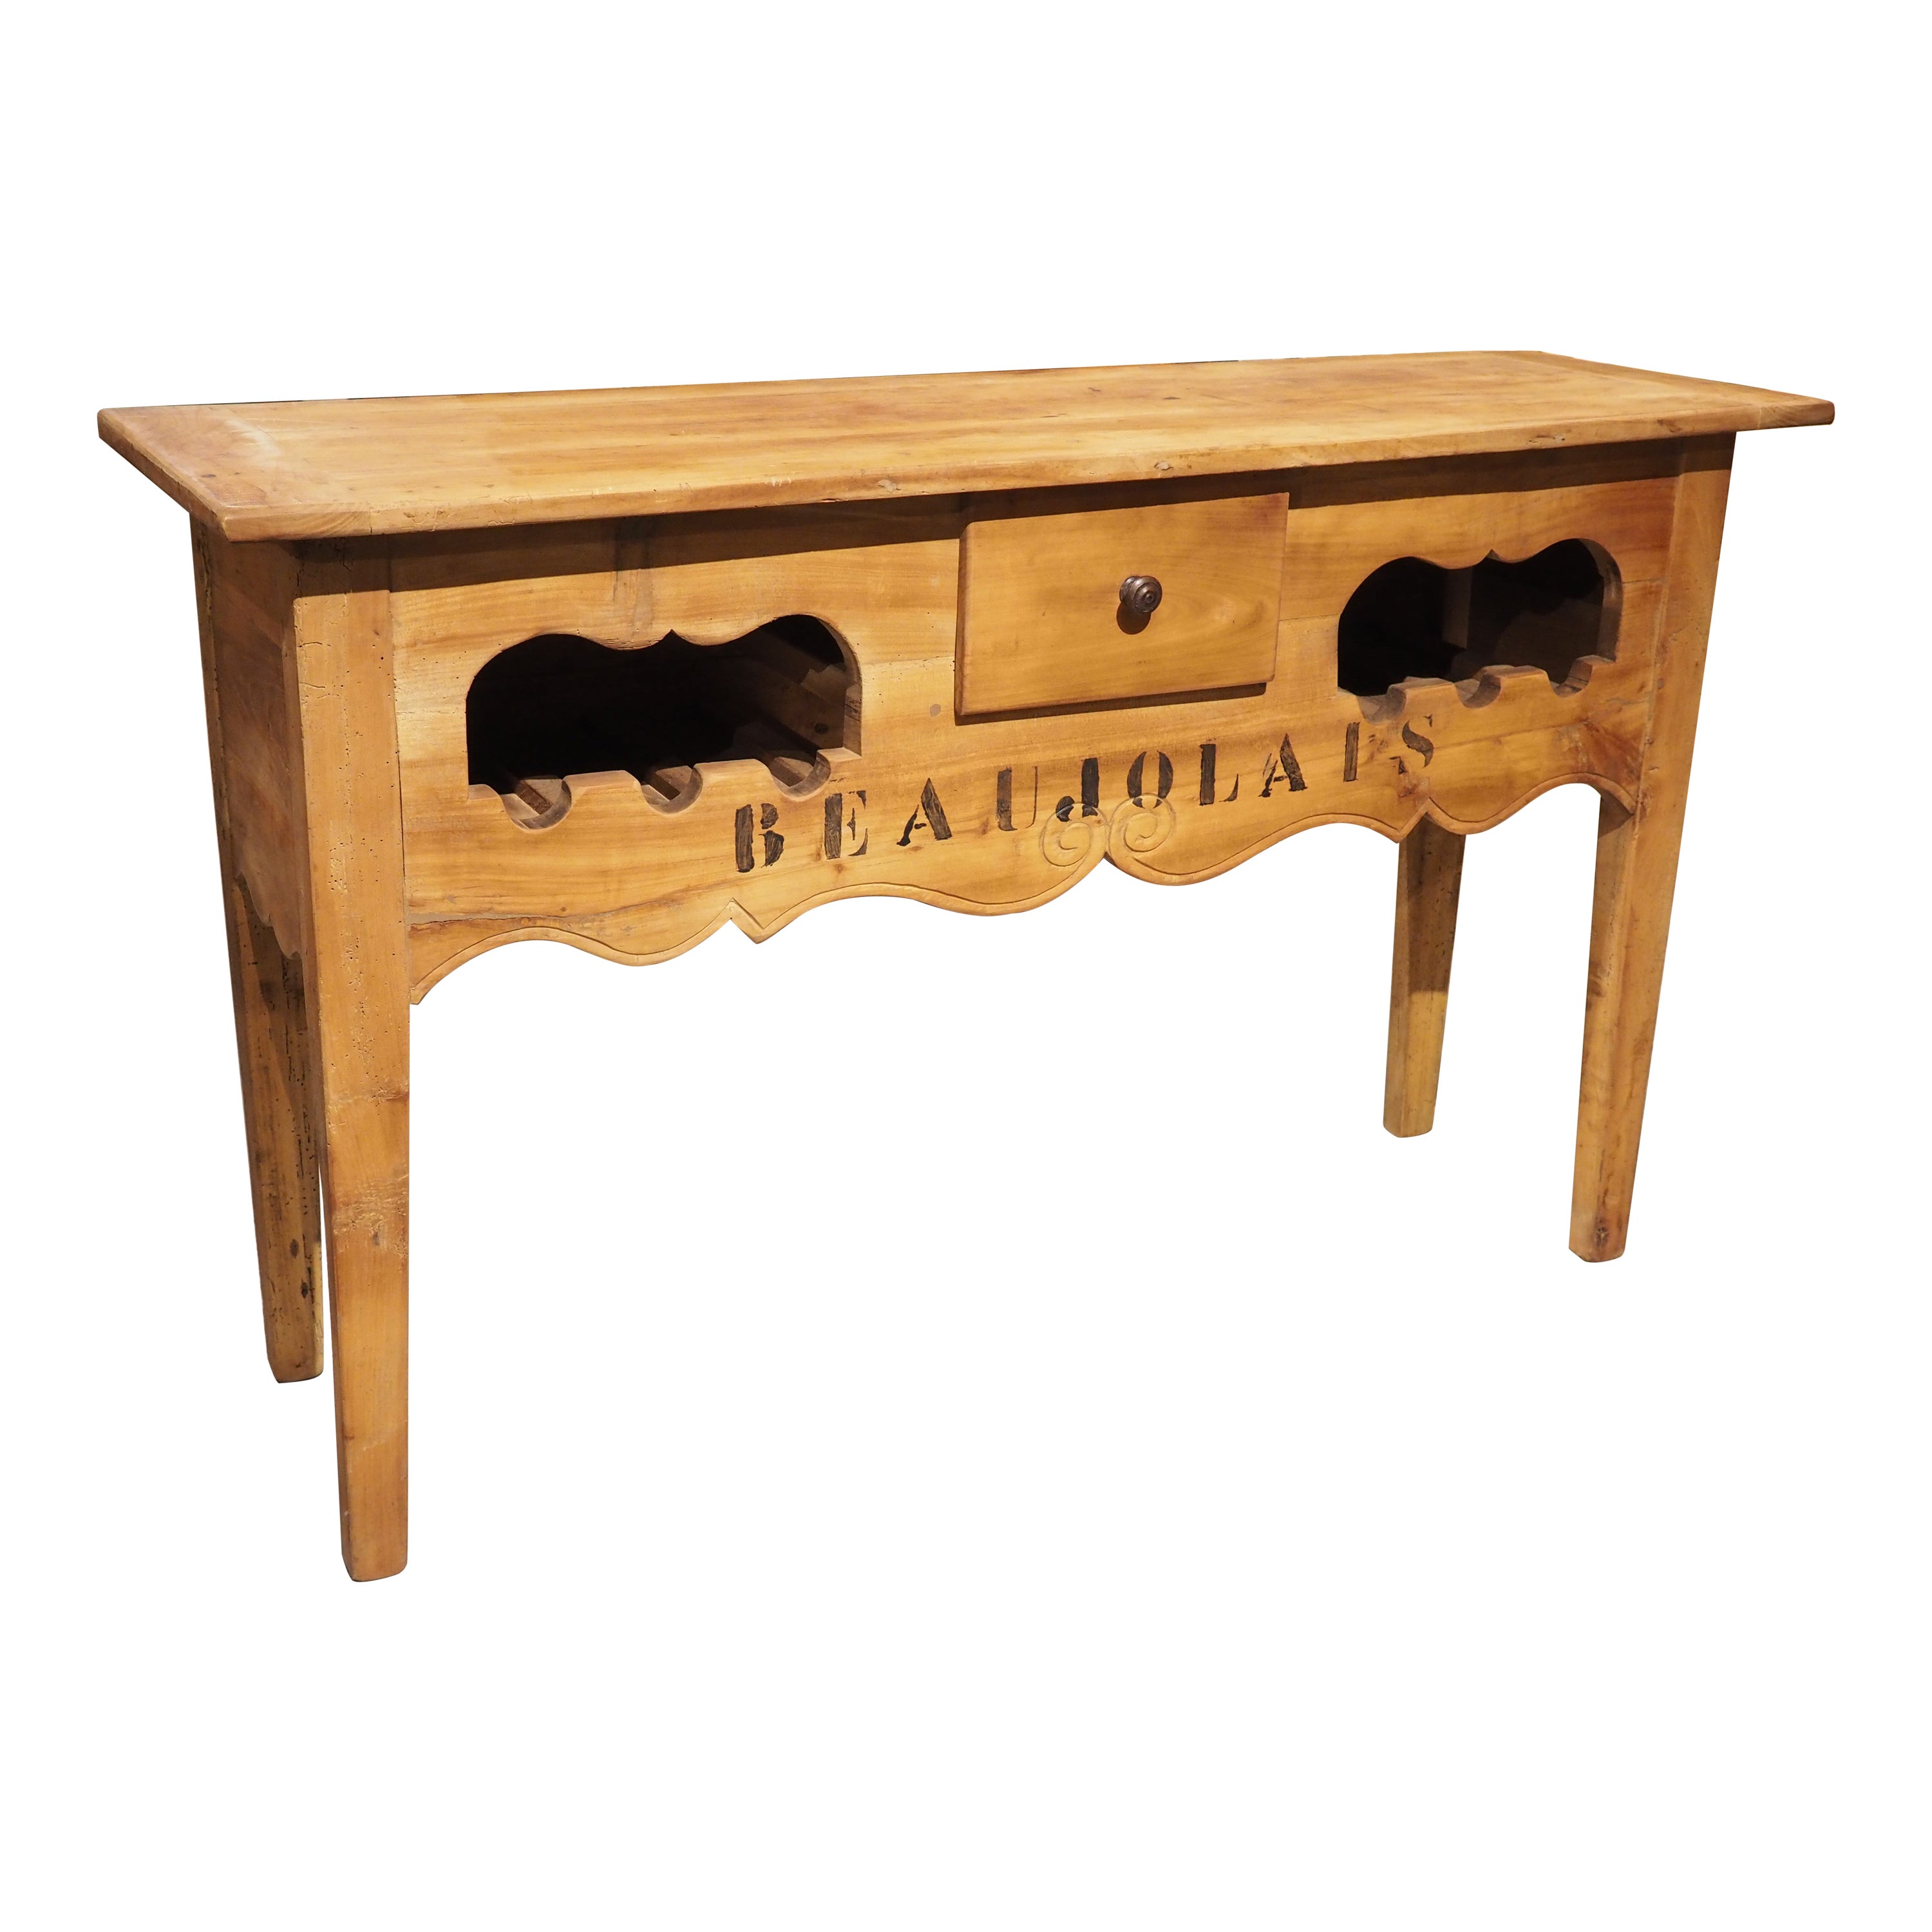 "Beaujolais" Wooden French Console Table with 6 Bottle Wine Rack For Sale